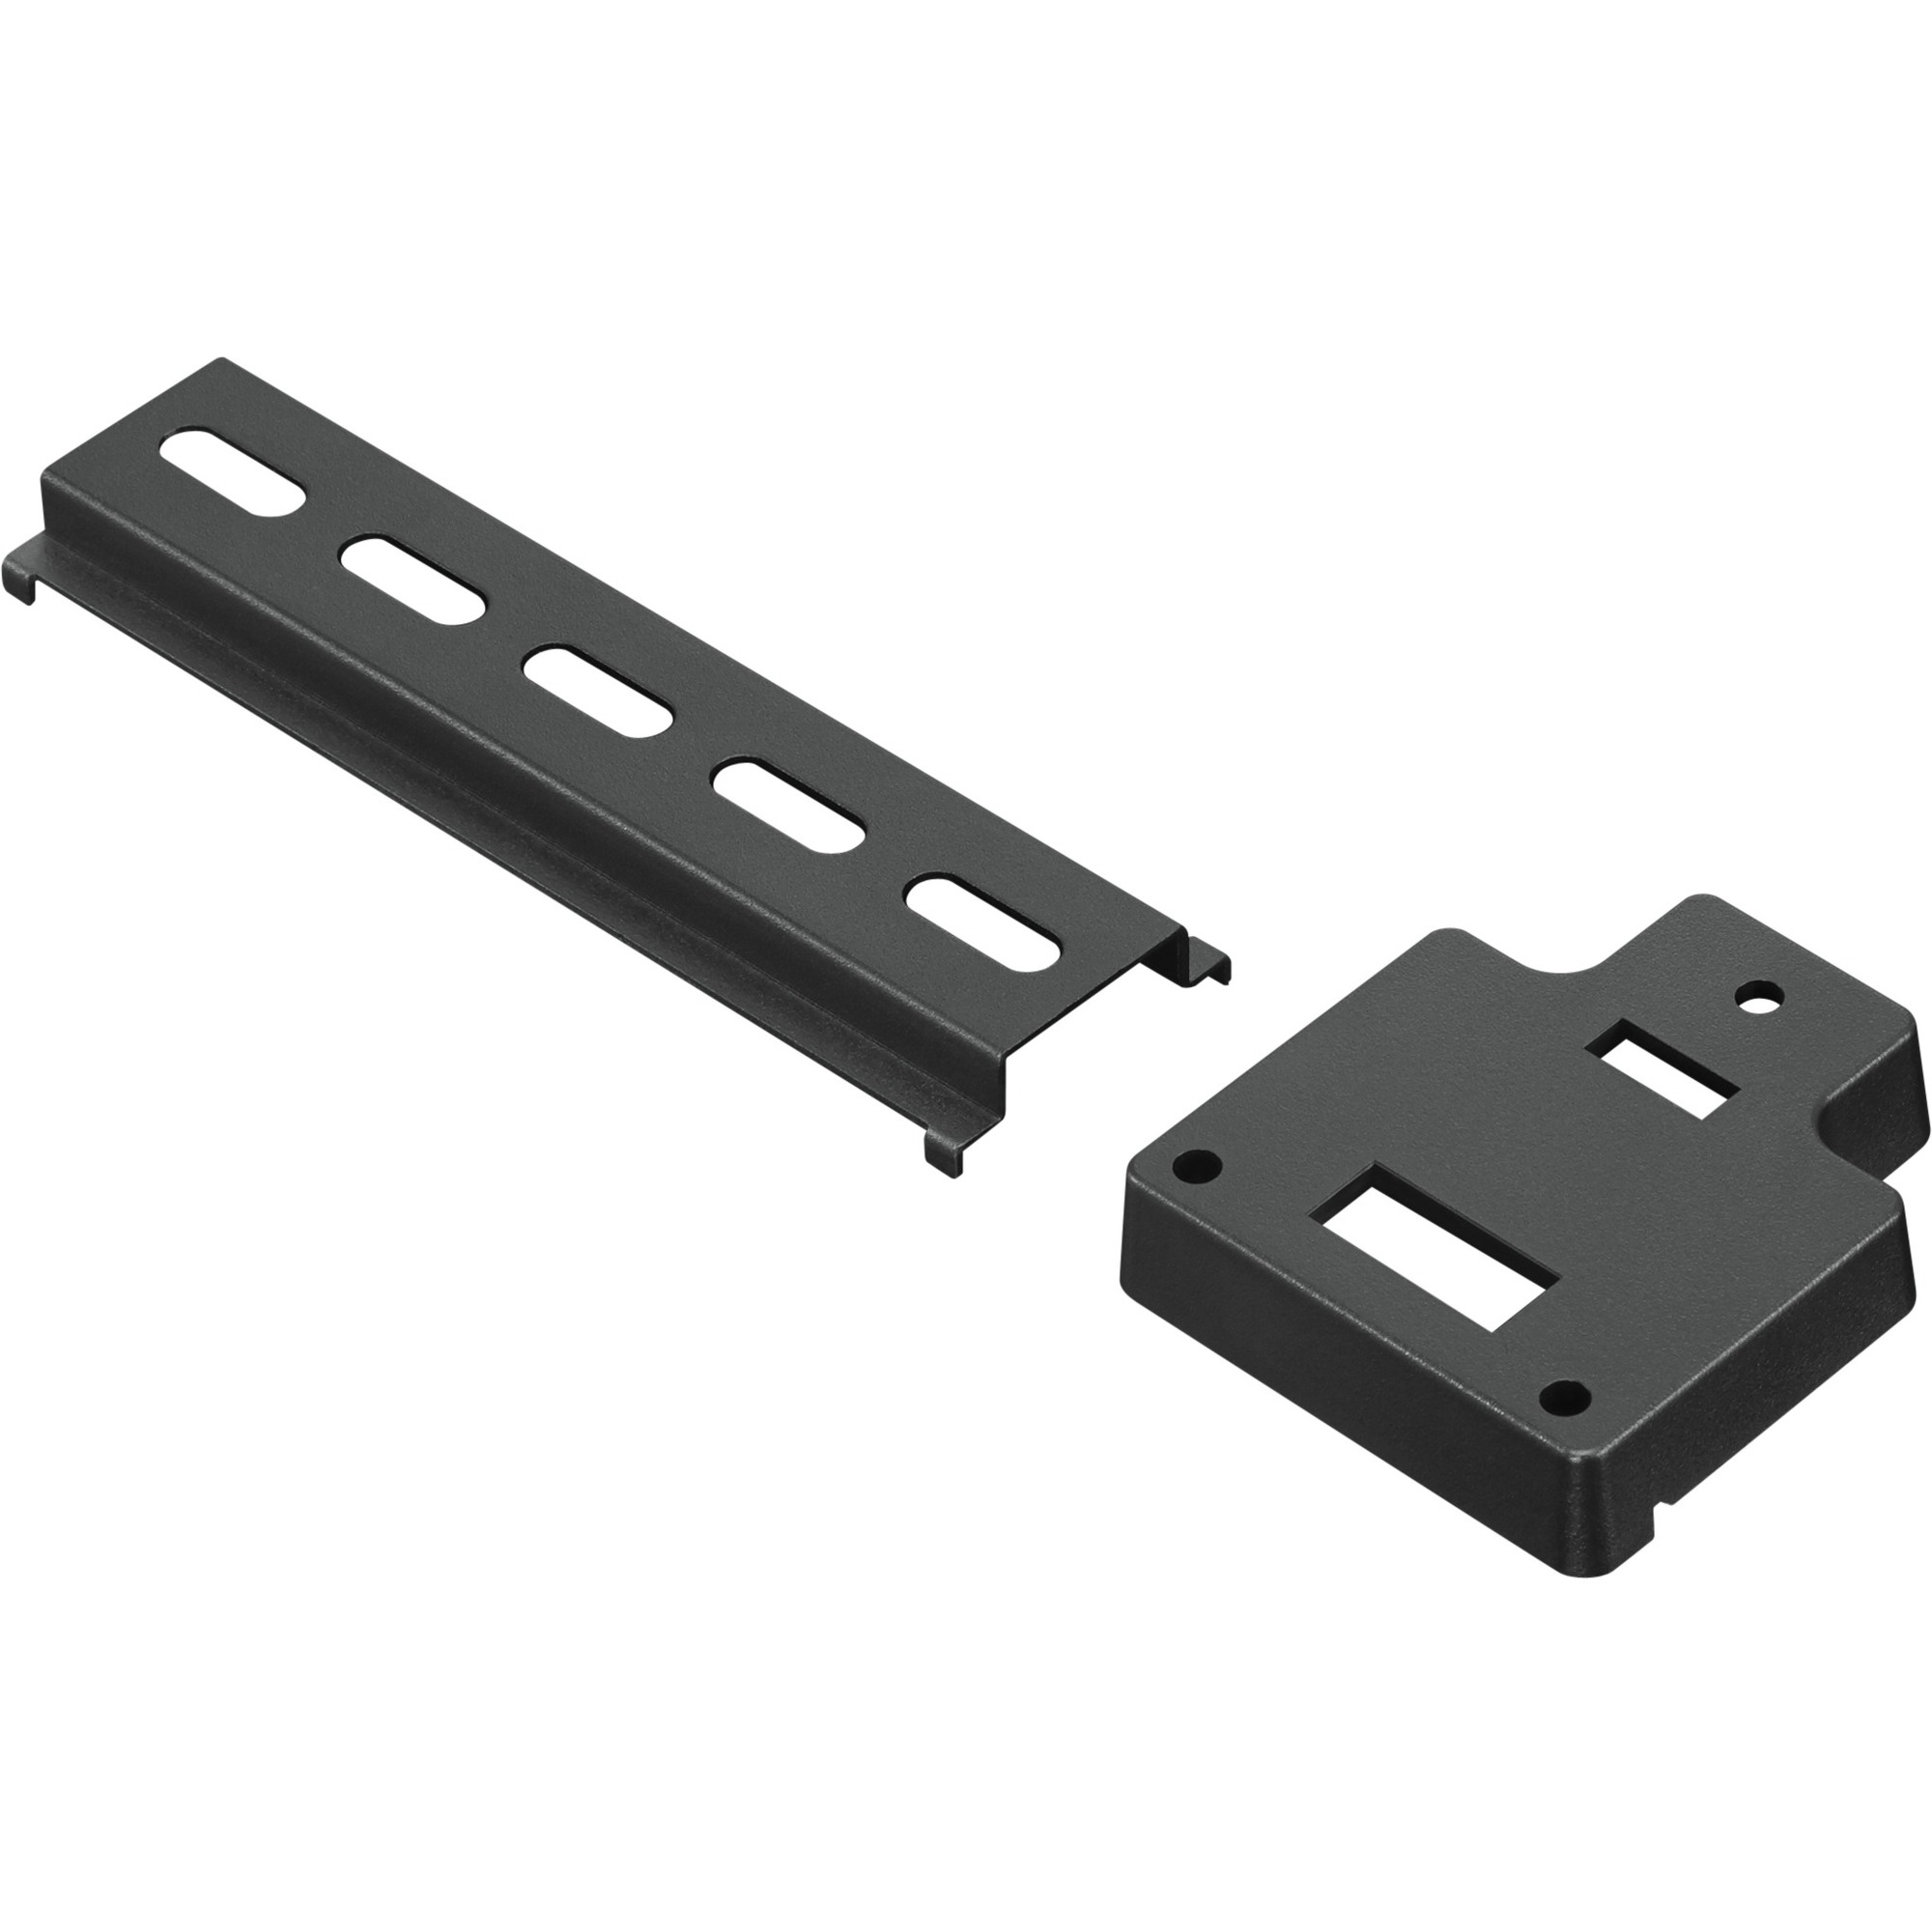 Lenovo Mounting Rail for Thin Client - image 2 of 2